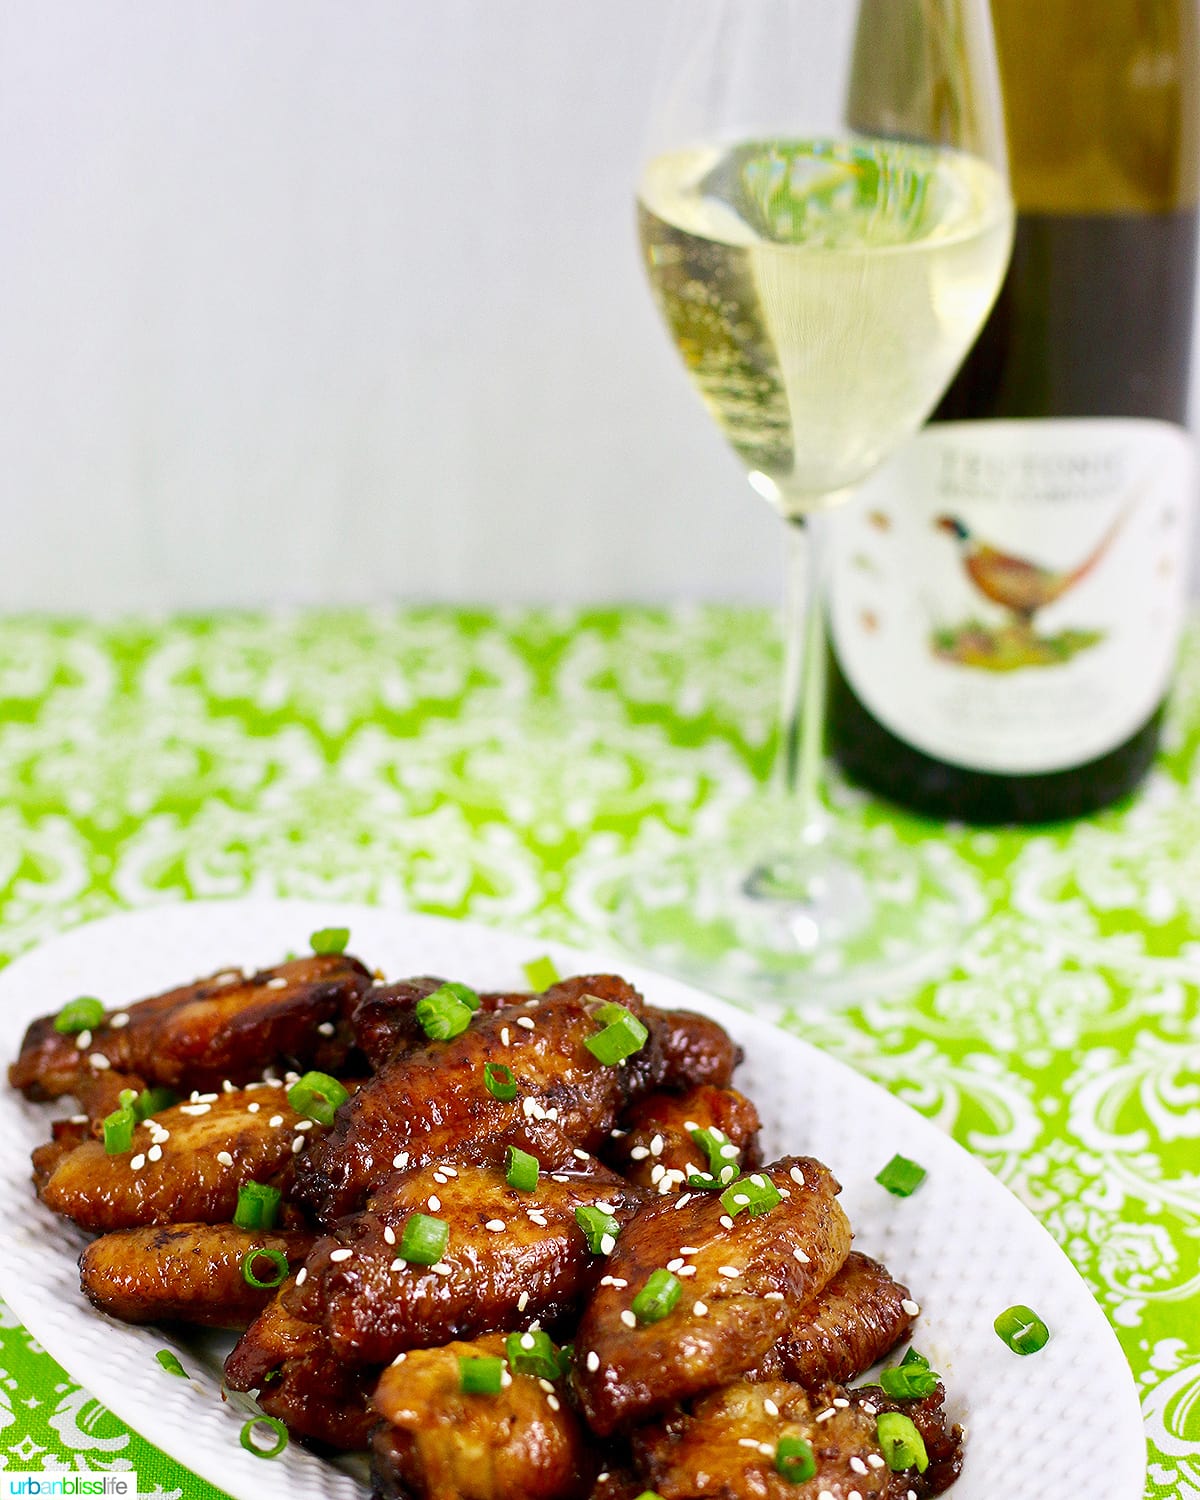 teriyaki chicken wings with a glass of Teutonic Riesling white wine